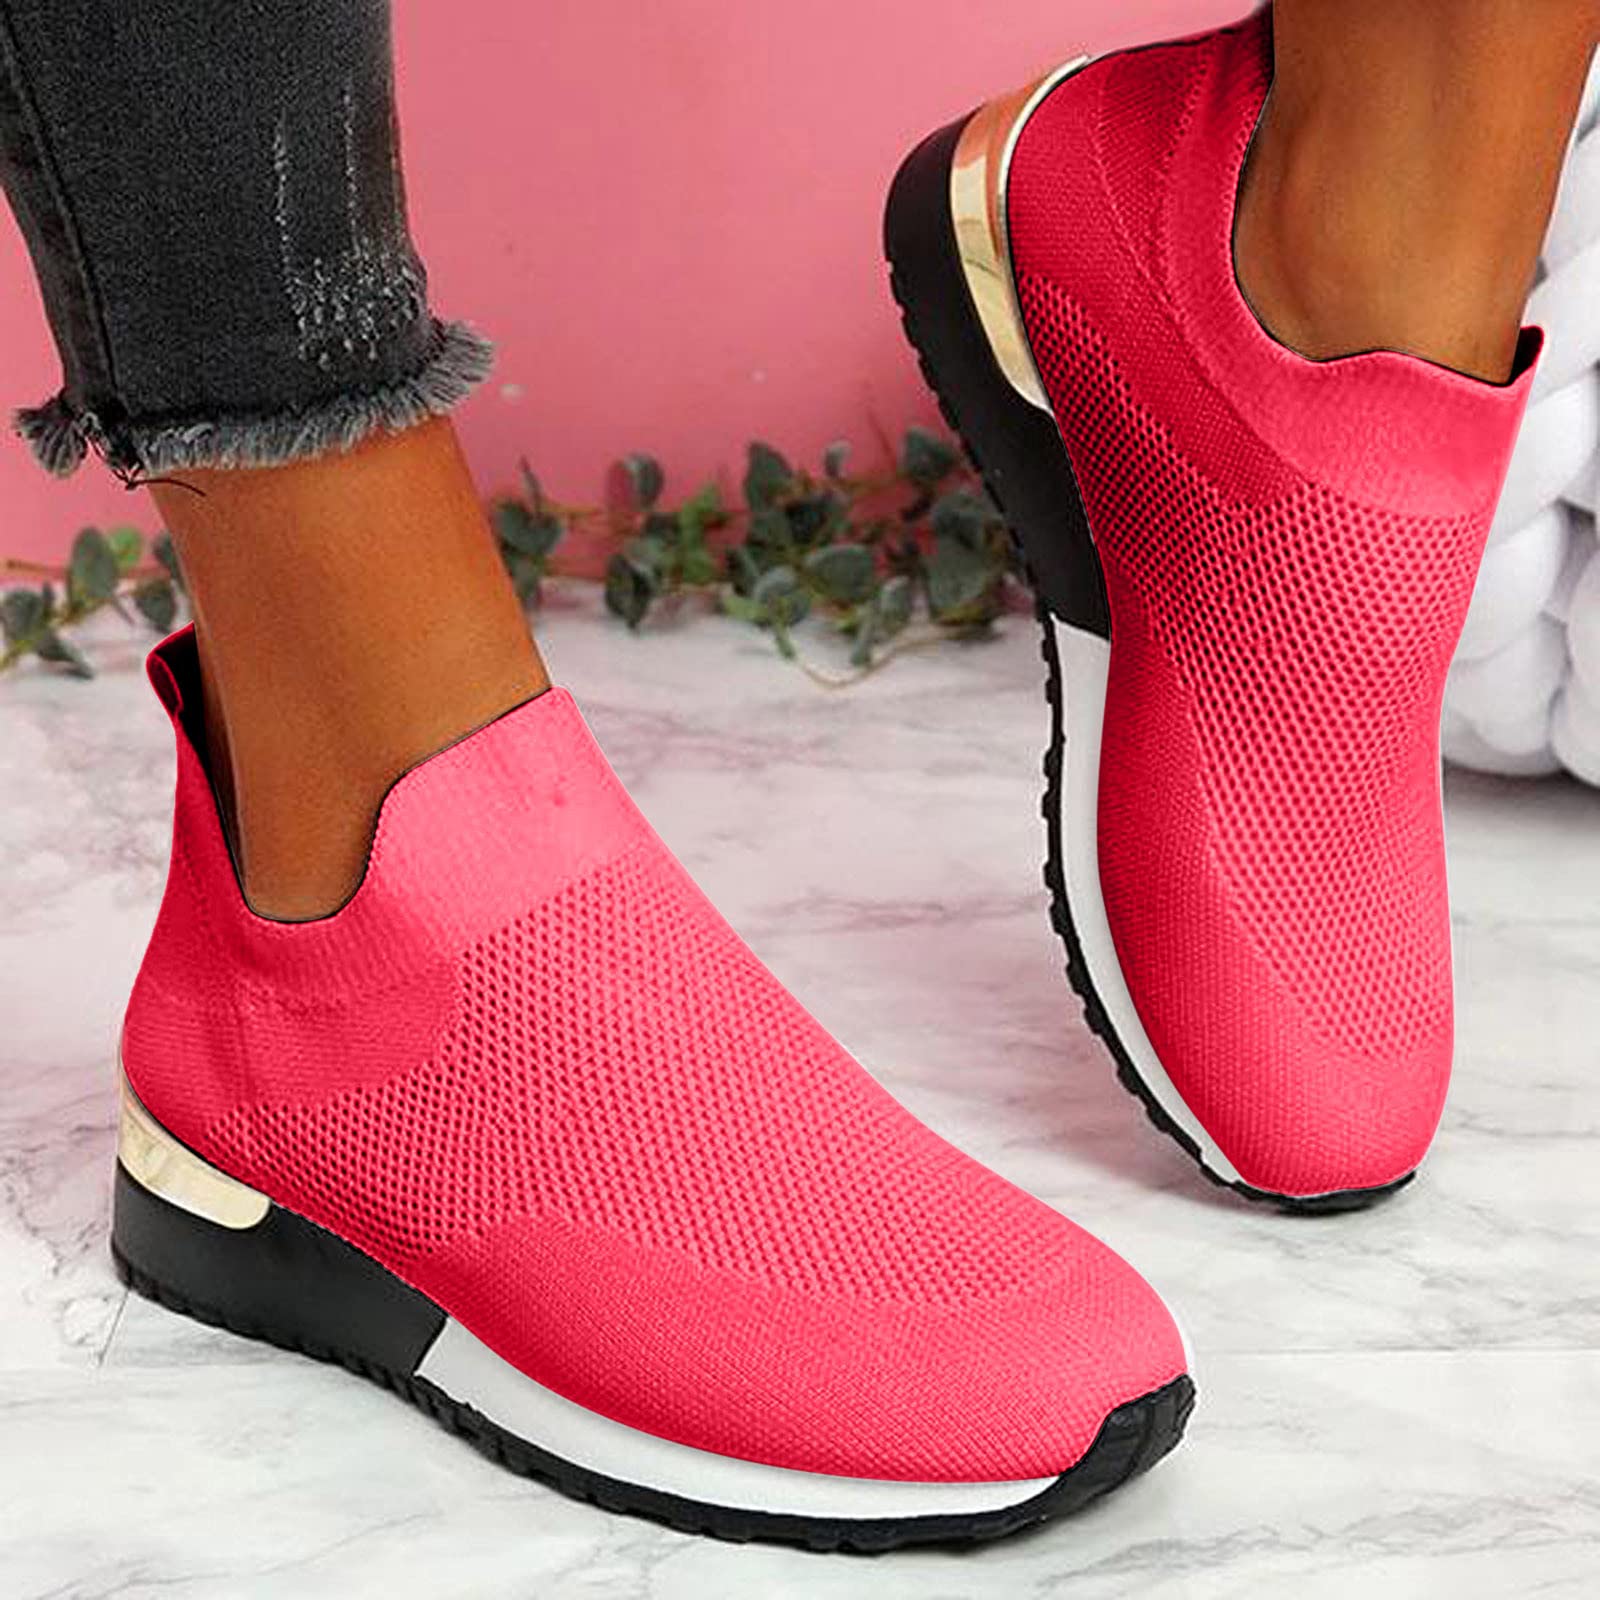 Rodam Arthritis Sneakers for Women Men Comfortable Arch Support Shoes Casual Slip On High Top Mesh Shoes Breathable Running Walking Shoes Travel Basketball Tennis Athletic Shoes (Red, 9)